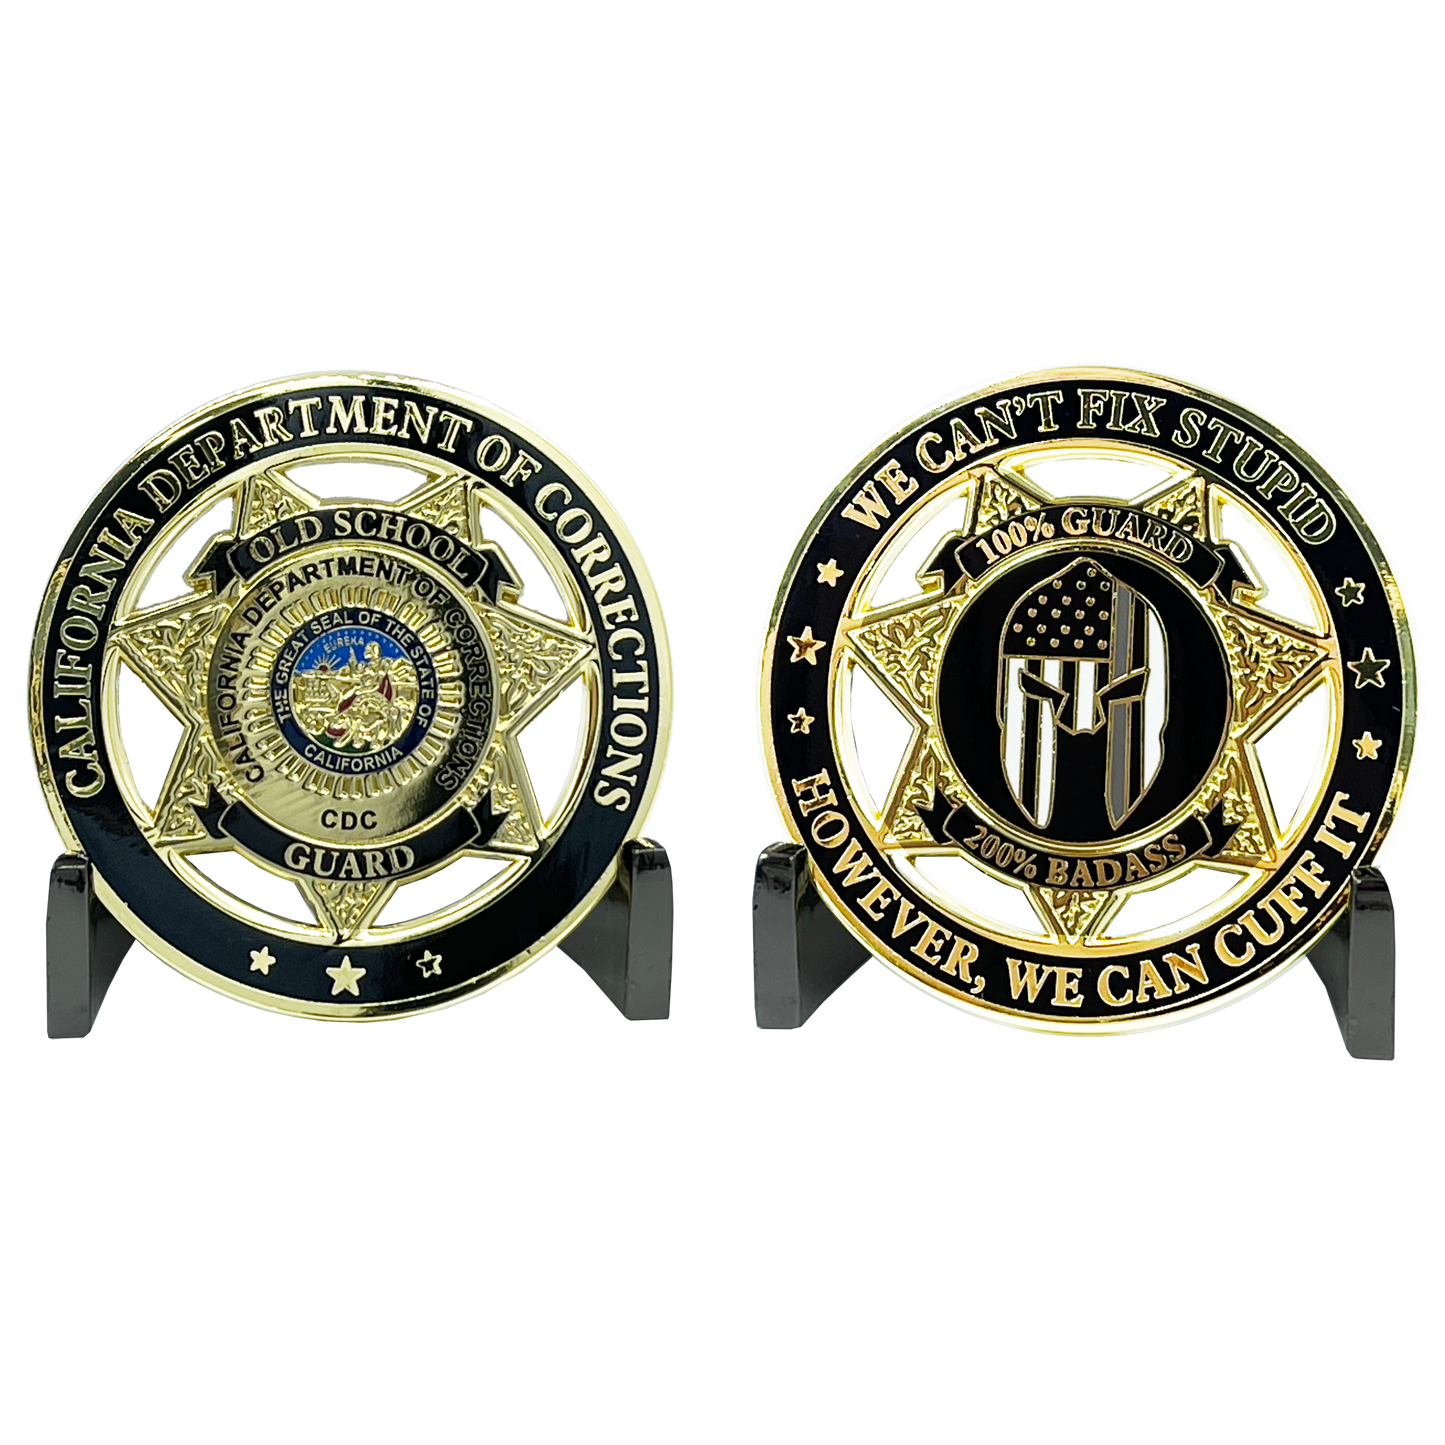 EL3-020 Old School Prison Jail Guard Challenge Coin Correctional Officer CO California Department of Corrections CDC thin gray line gladiator police